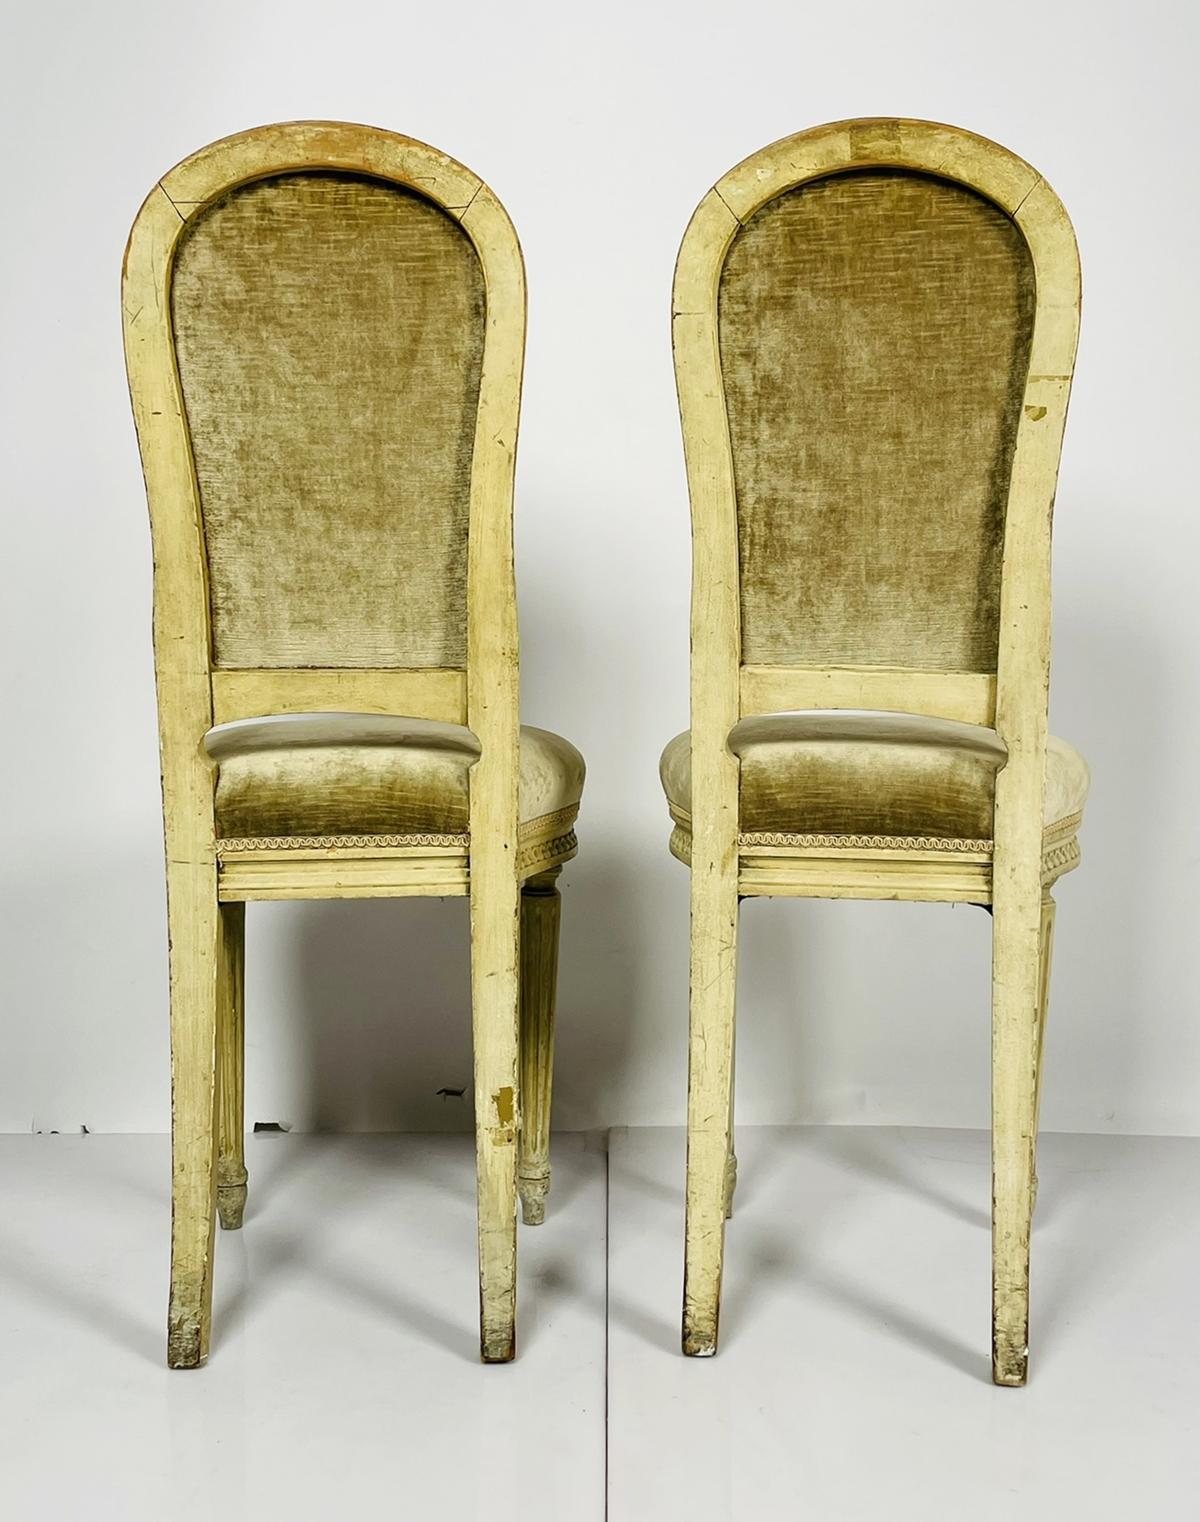 Beautiful pair of side chairs in the Louis XVI style, the chairs are upholstered in a velvet fabric and a white wash finish.
The chairs date from the early 1900s and are in good vintage condition.

Measurements:
38.75 inches high x 15.50 inches